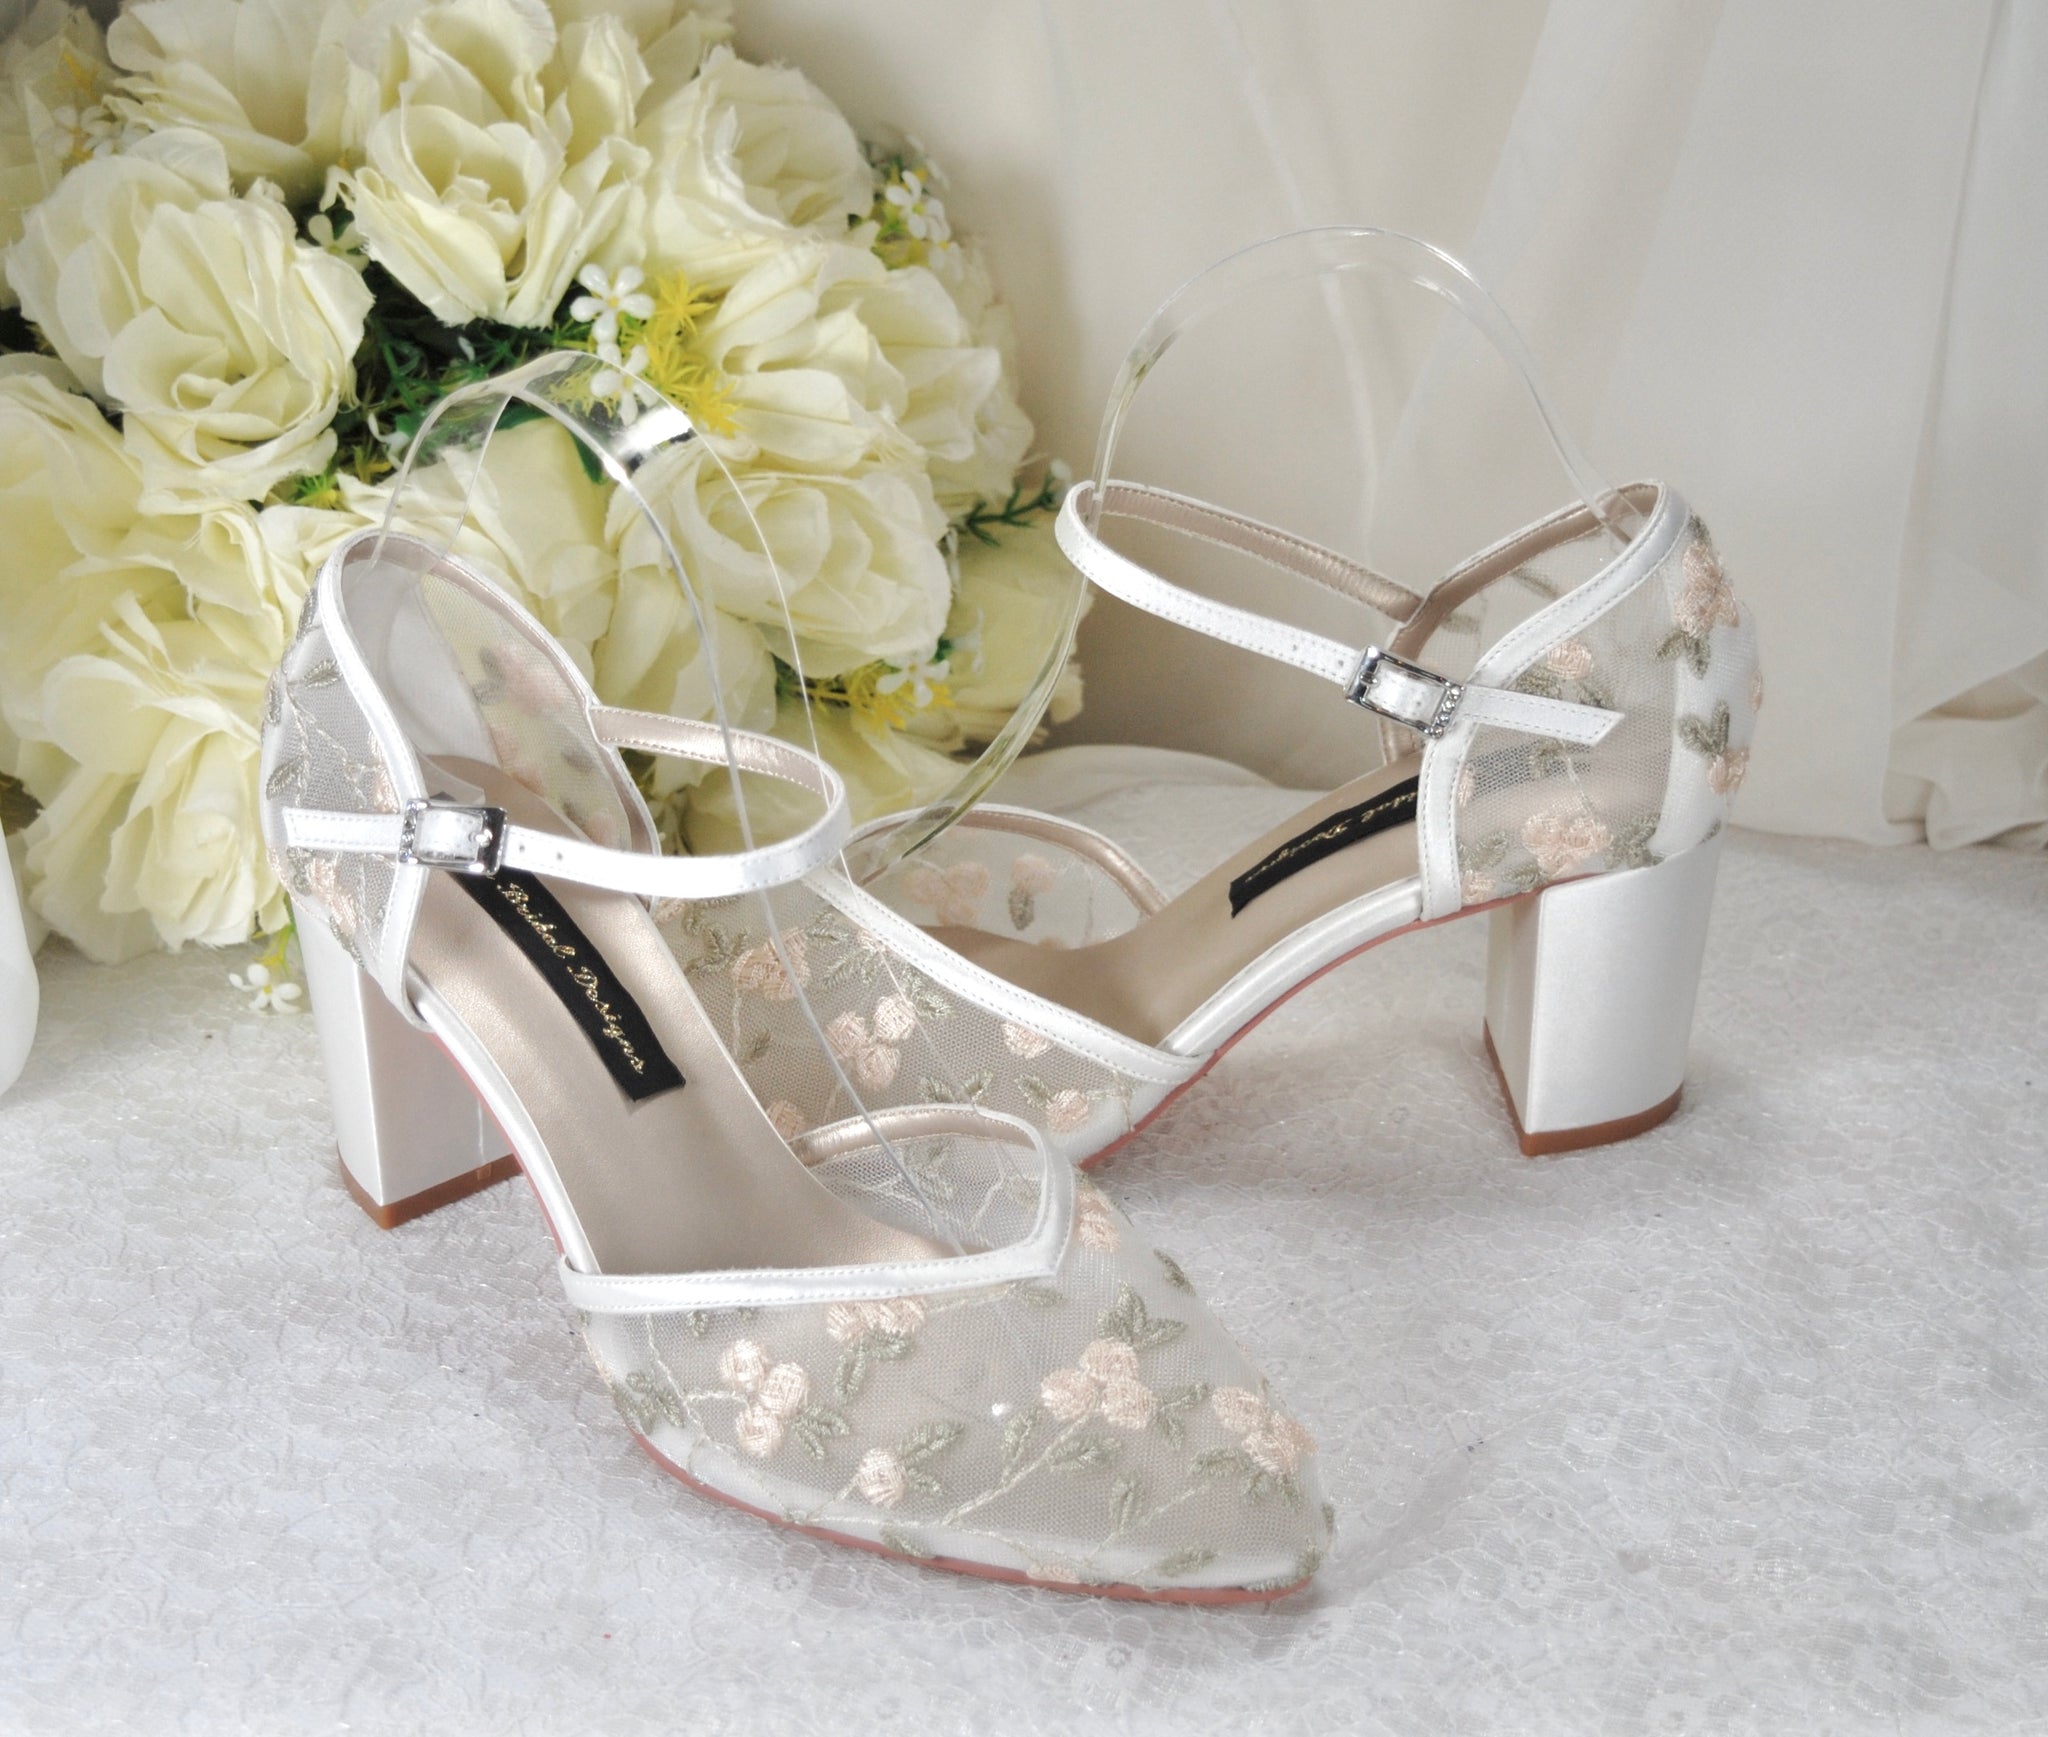 Luxury Crystal Wedding Bridal Shoes With Rhinestones High Quality Tan Block  Heel Sandals With 9CM Pointed Toe At An Affordable Price From Adrs7, $36.85  | DHgate.Com